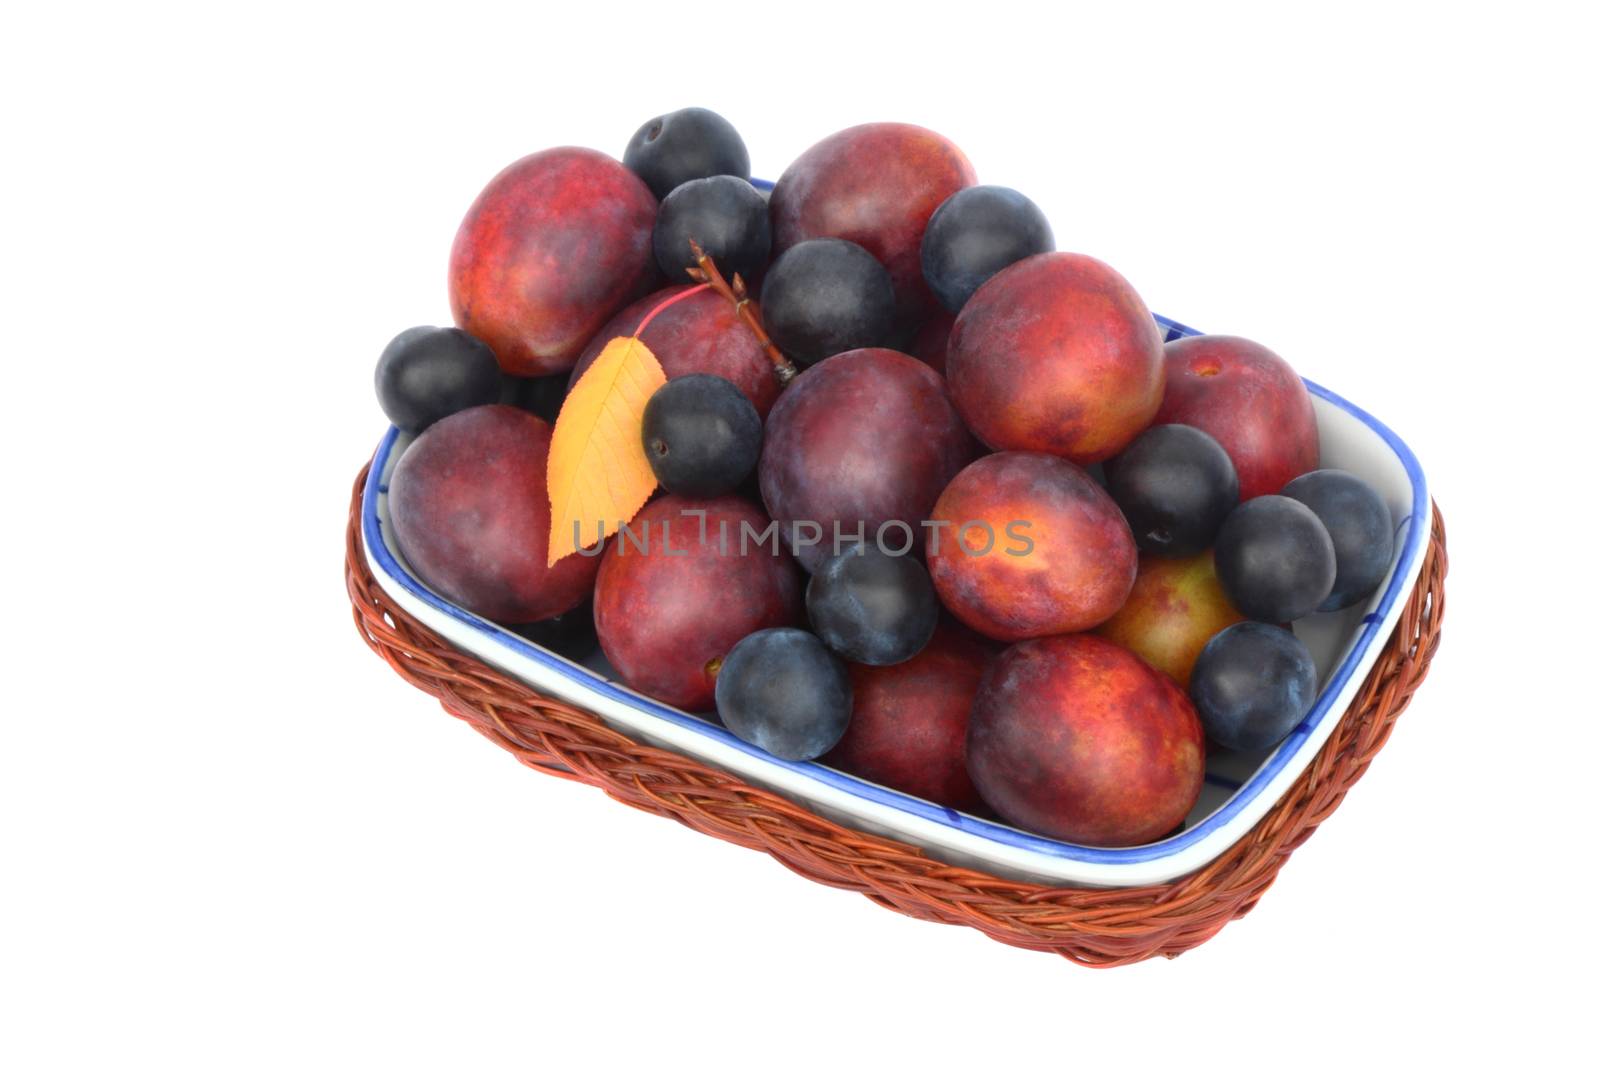 Wicker basket placed in her large ripe plums and prunes